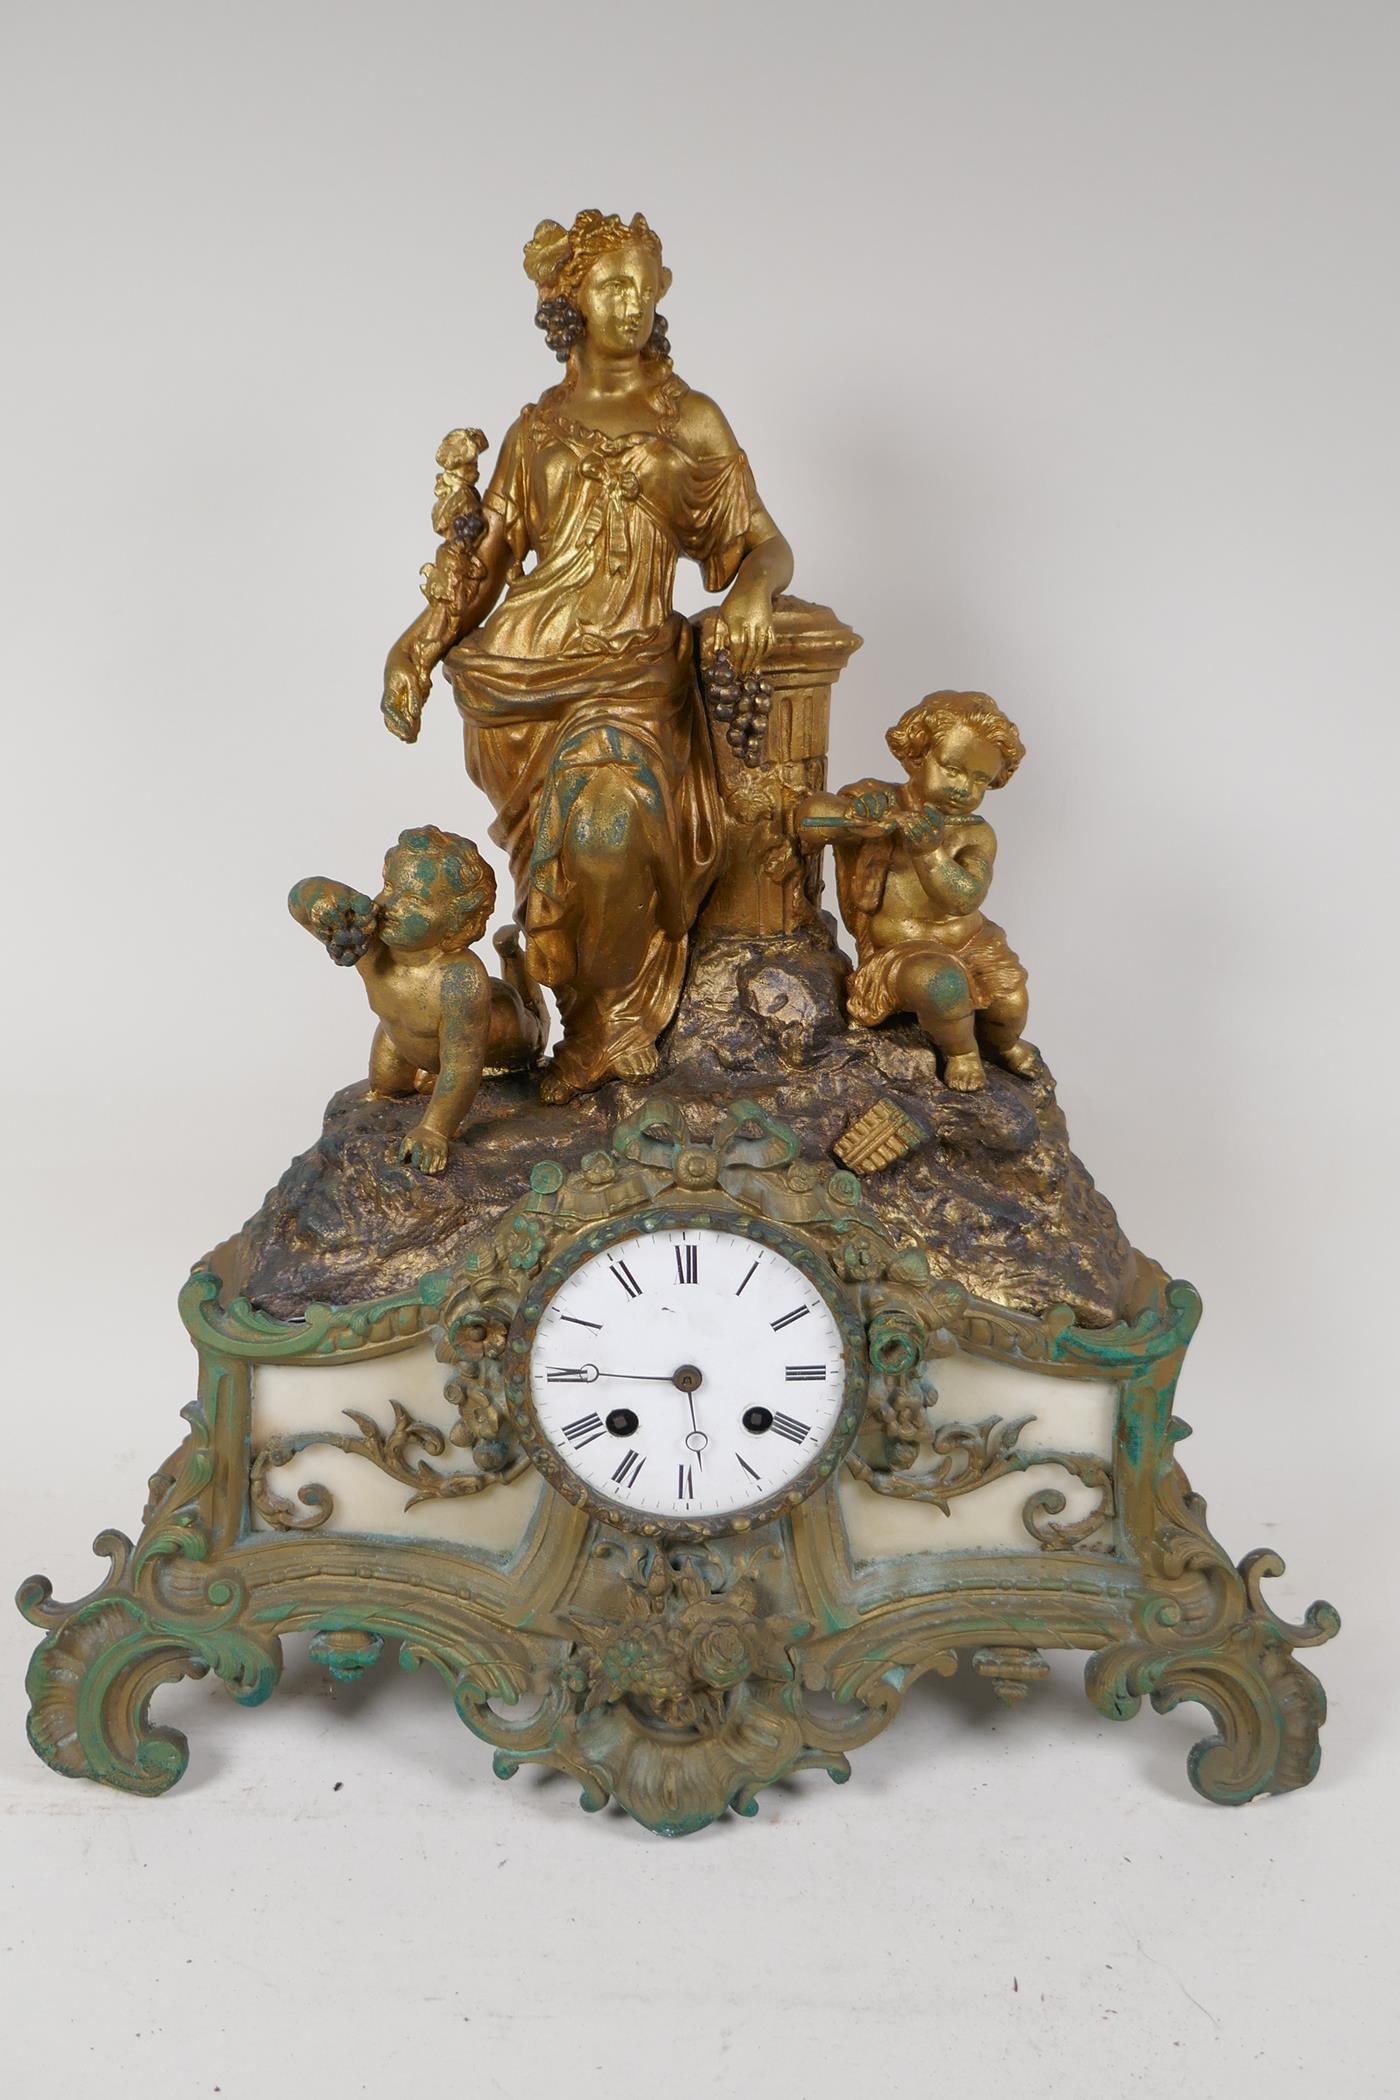 A C19th French spelter mantel clock adorned with Baccanalian figures, with twin train movement